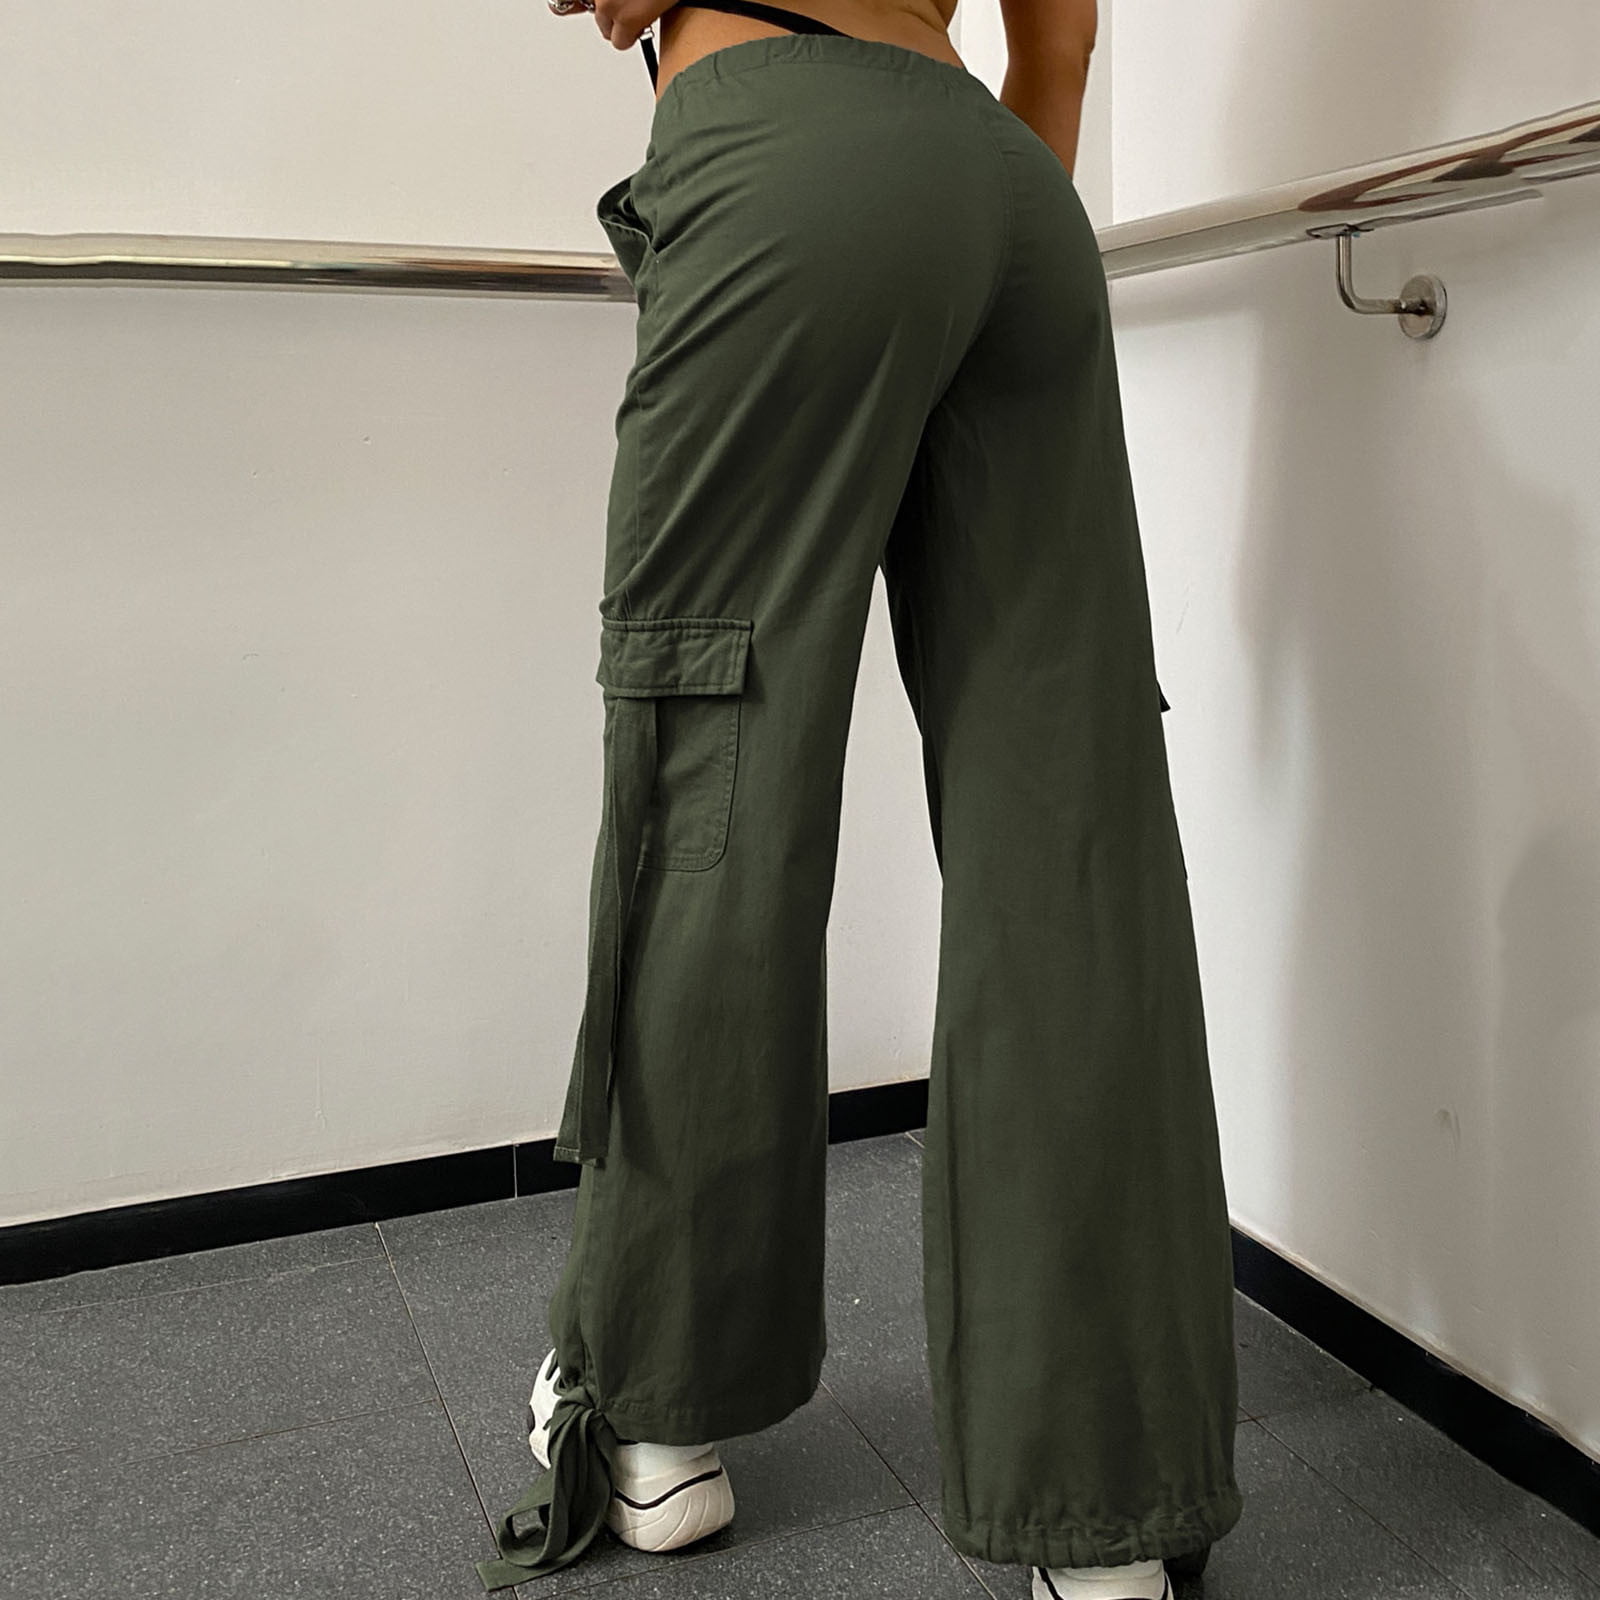 RQYYD Cargo Pants Women Casual Loose High Waisted Straight Leg Baggy Pants  Trousers Lightweight Outdoor Travel Pants with Pockets(Army Green,XXL)